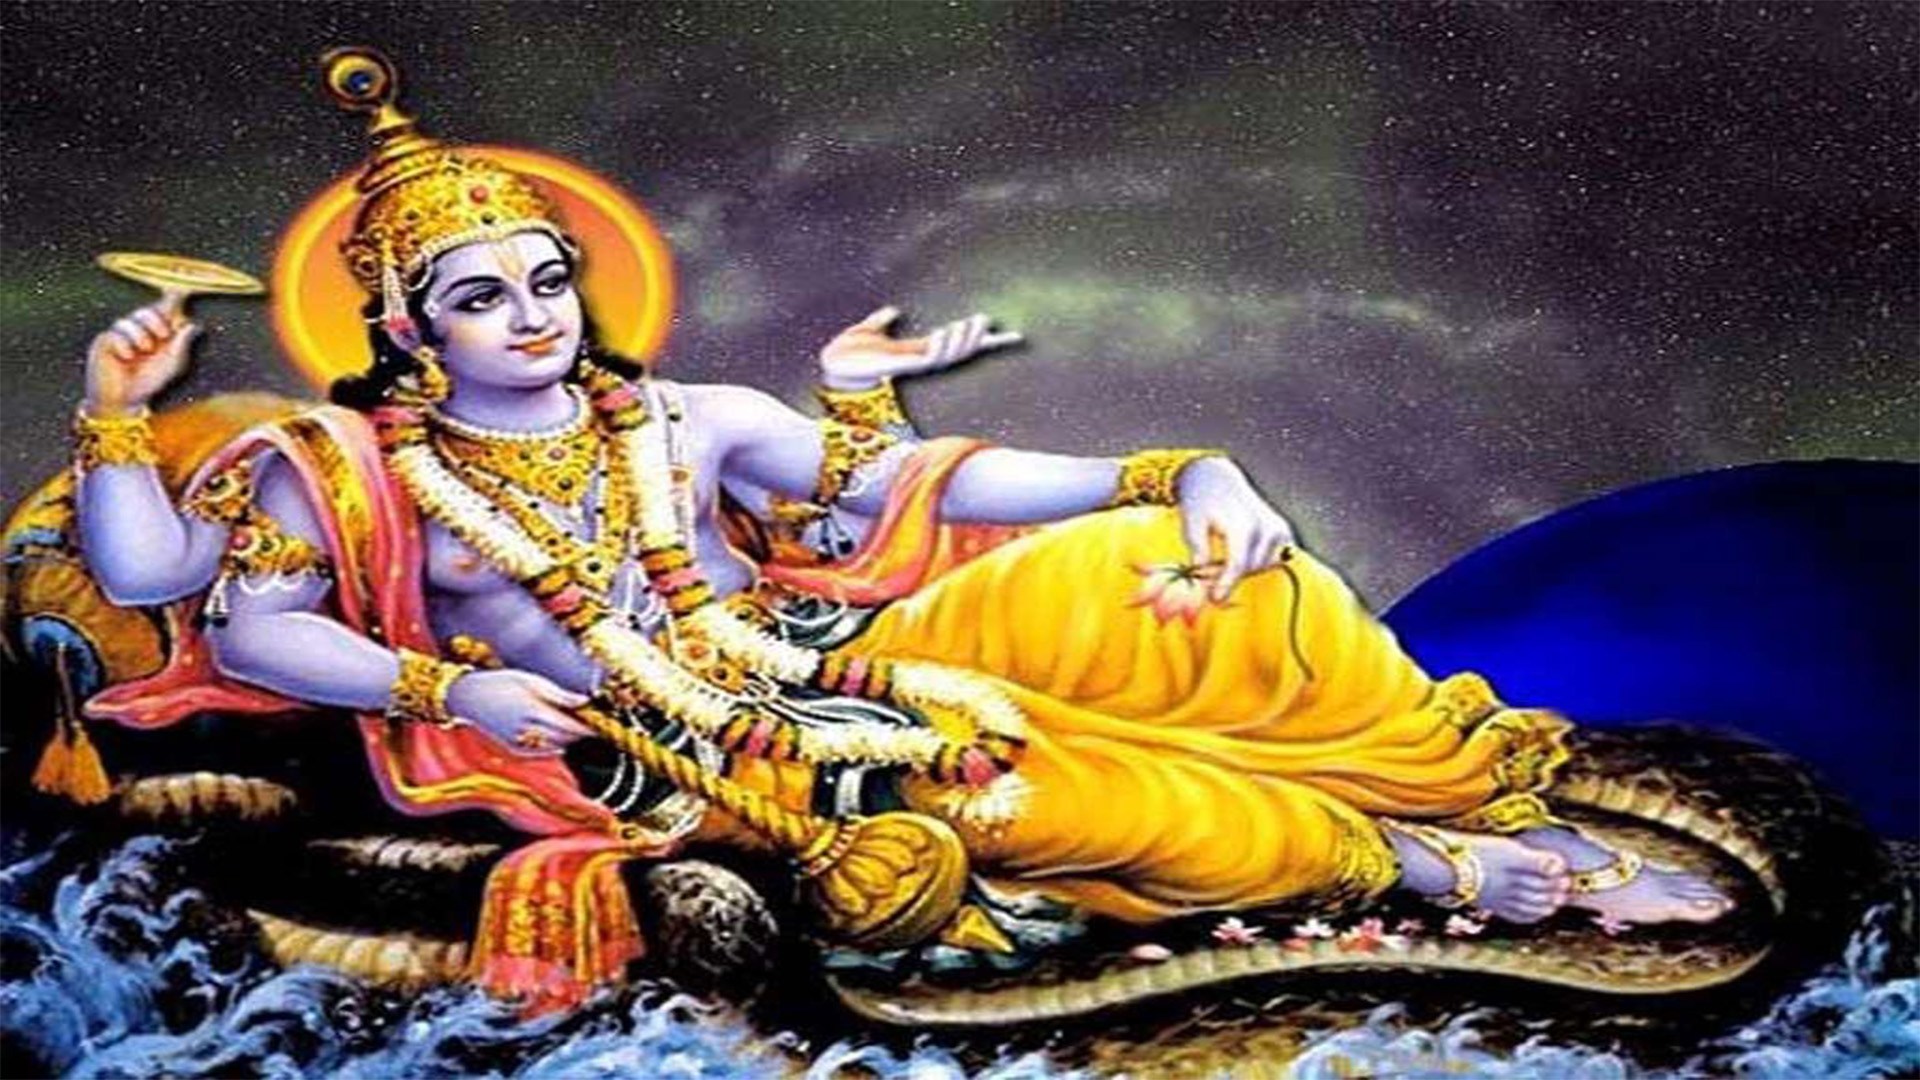 Srimad Bhagavatam - Why do the devotees of Vishnu (who is the consort of  the Goddess of Wealth, Lakshmi) not get wealth? : r/hinduism